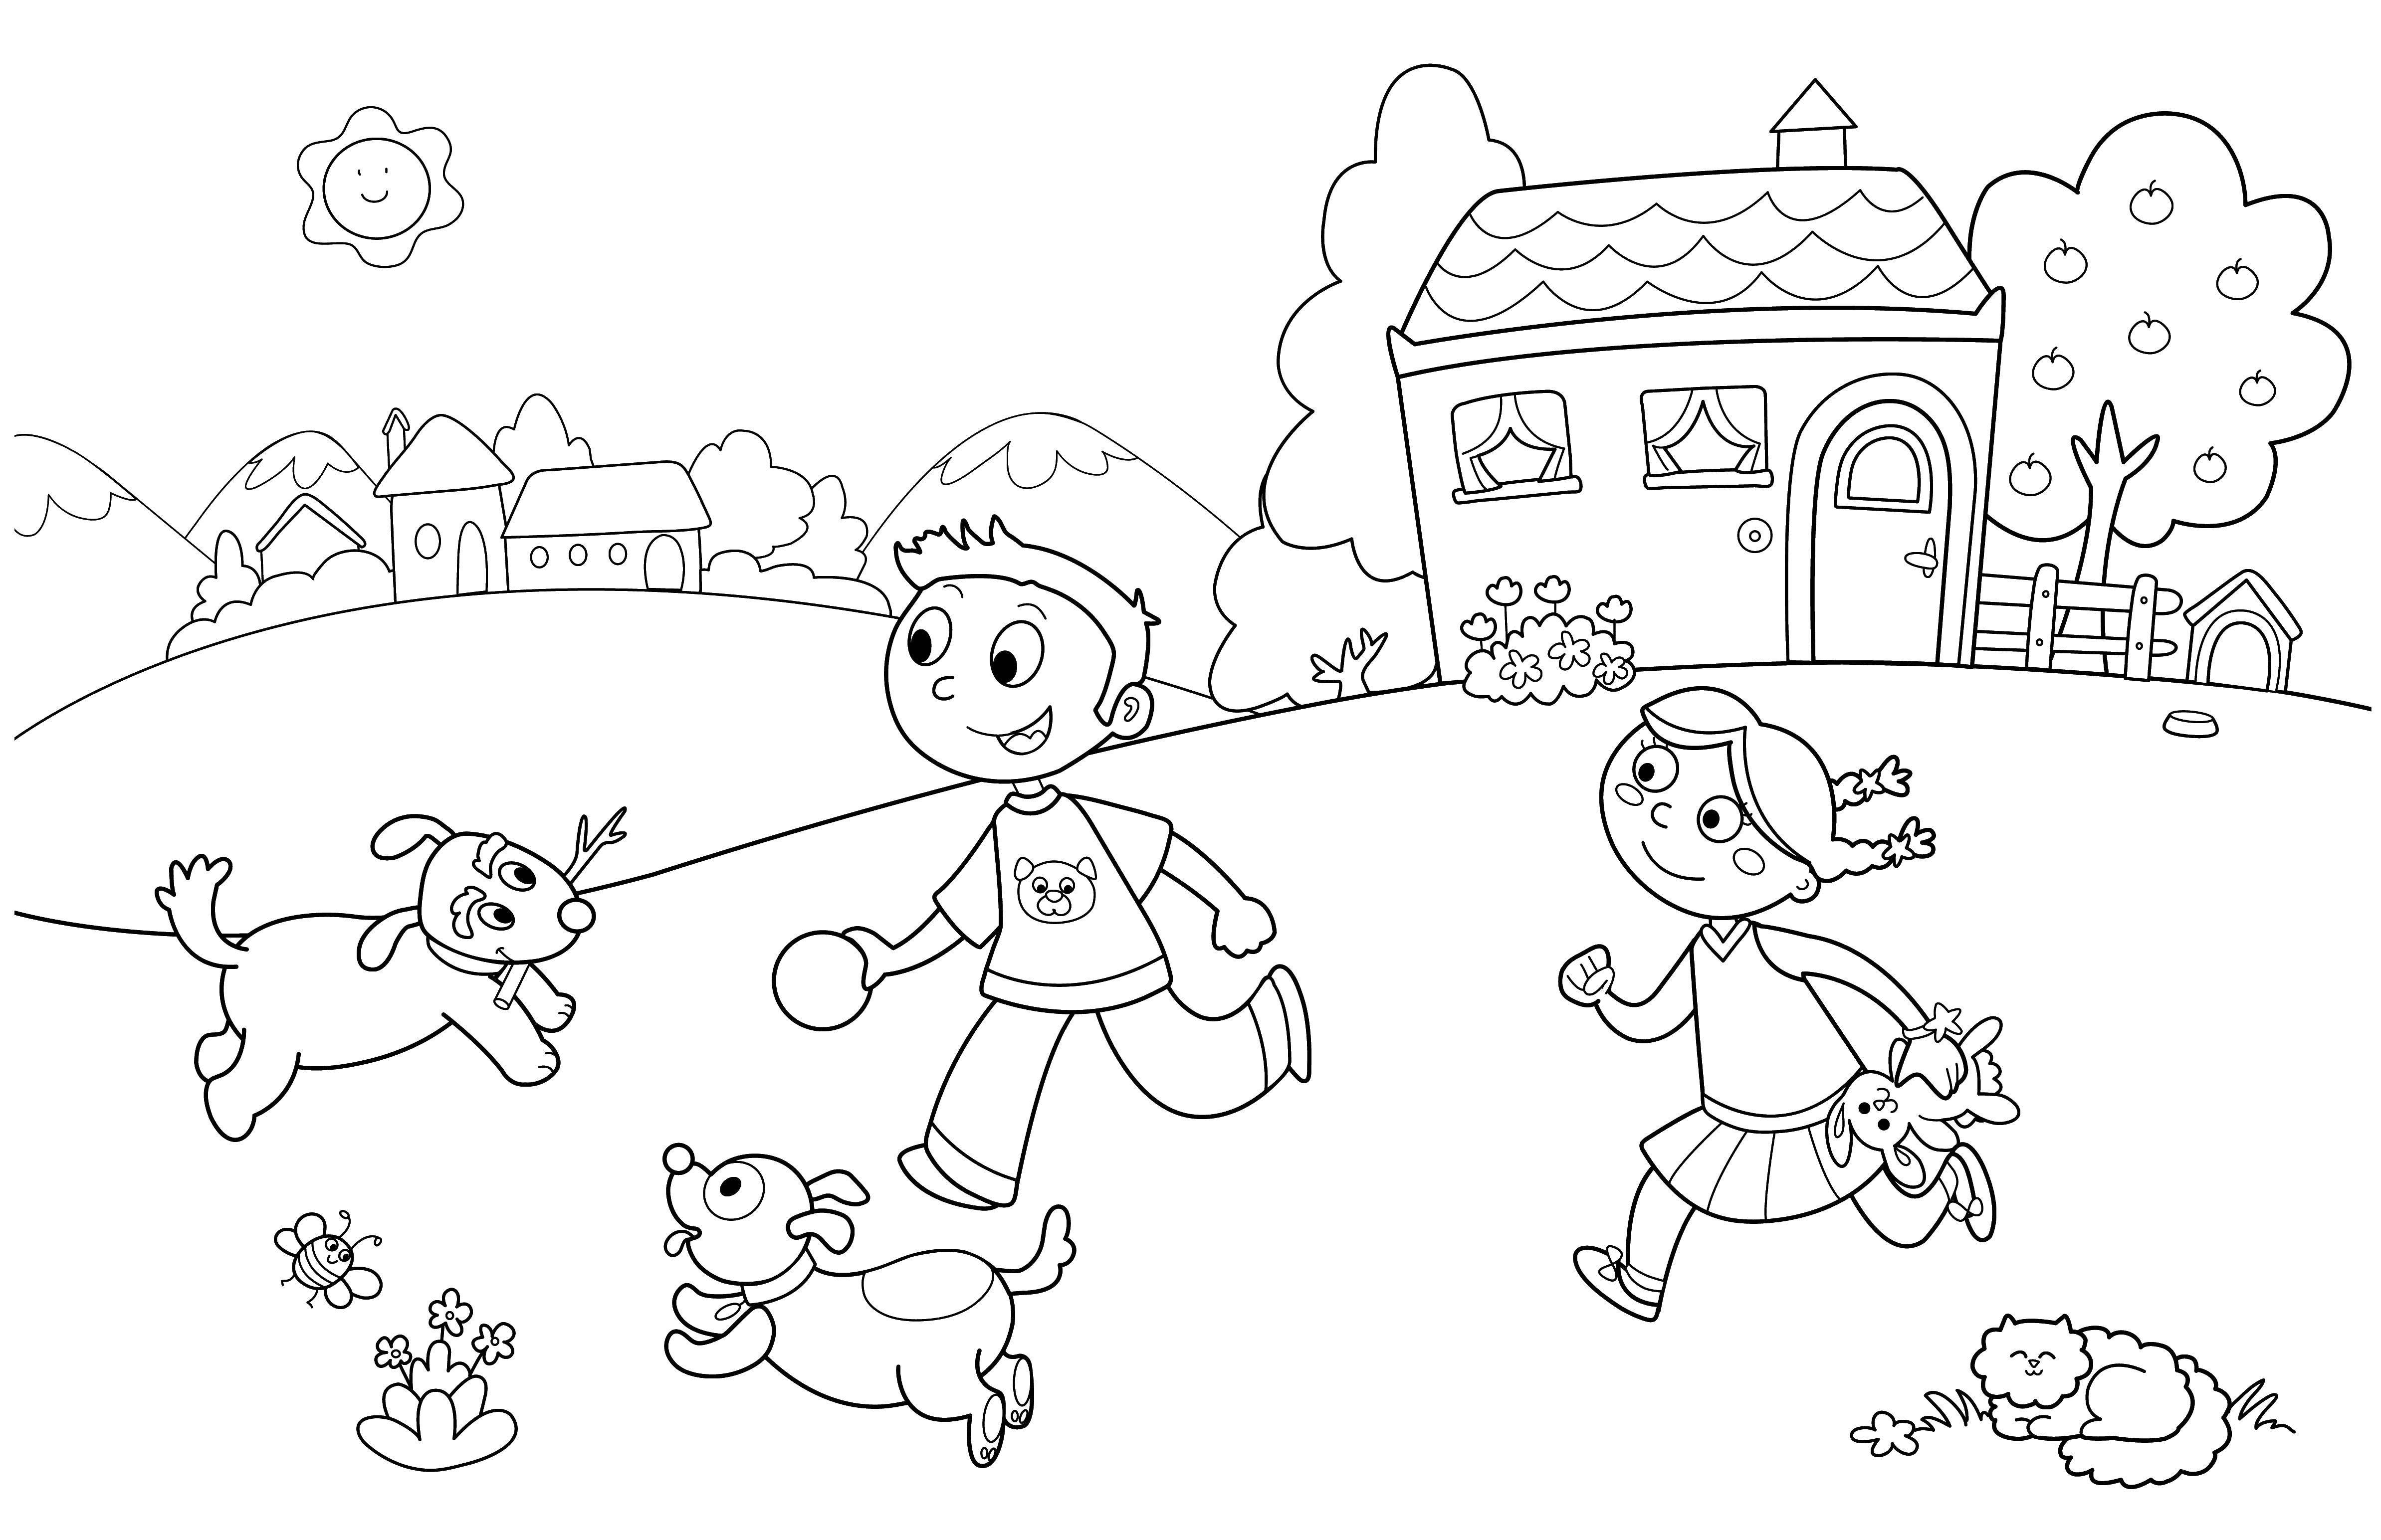 Coloring Children playing with dogs. Category Summer fun. Tags:  summer, kids, dogs, games.